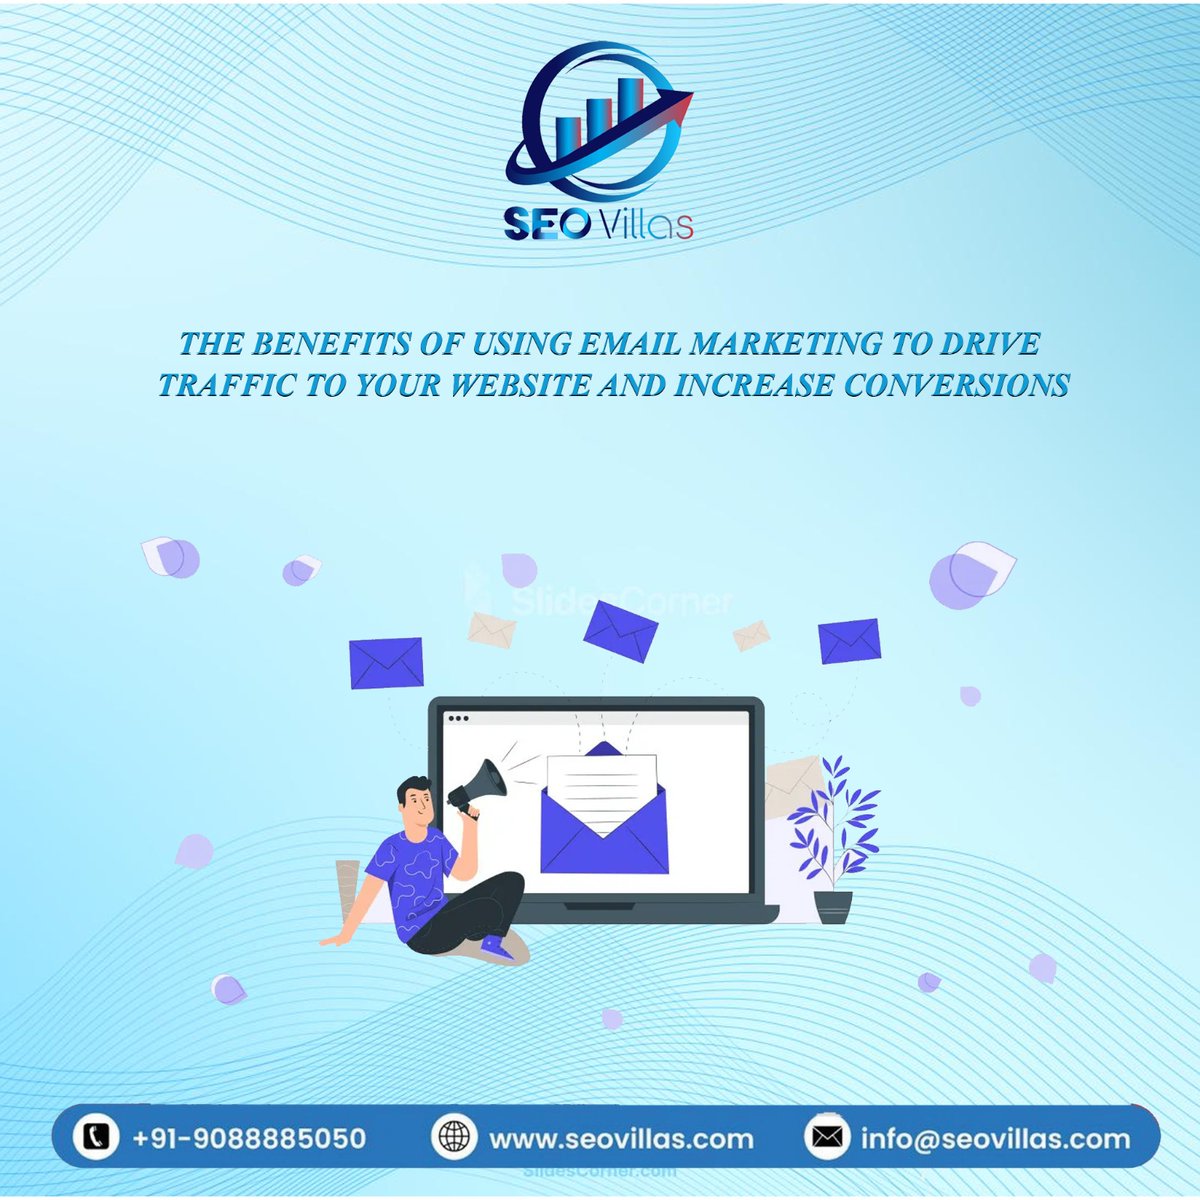 Don't underestimate email marketing! It drives targeted traffic to your website & boosts conversions. Segment your audience, personalize content, and clear CTAs for clicks! ➡️ seovillas.com/services/email… #onlinemarketing #conversions #digitalmarketing #emailmarketing